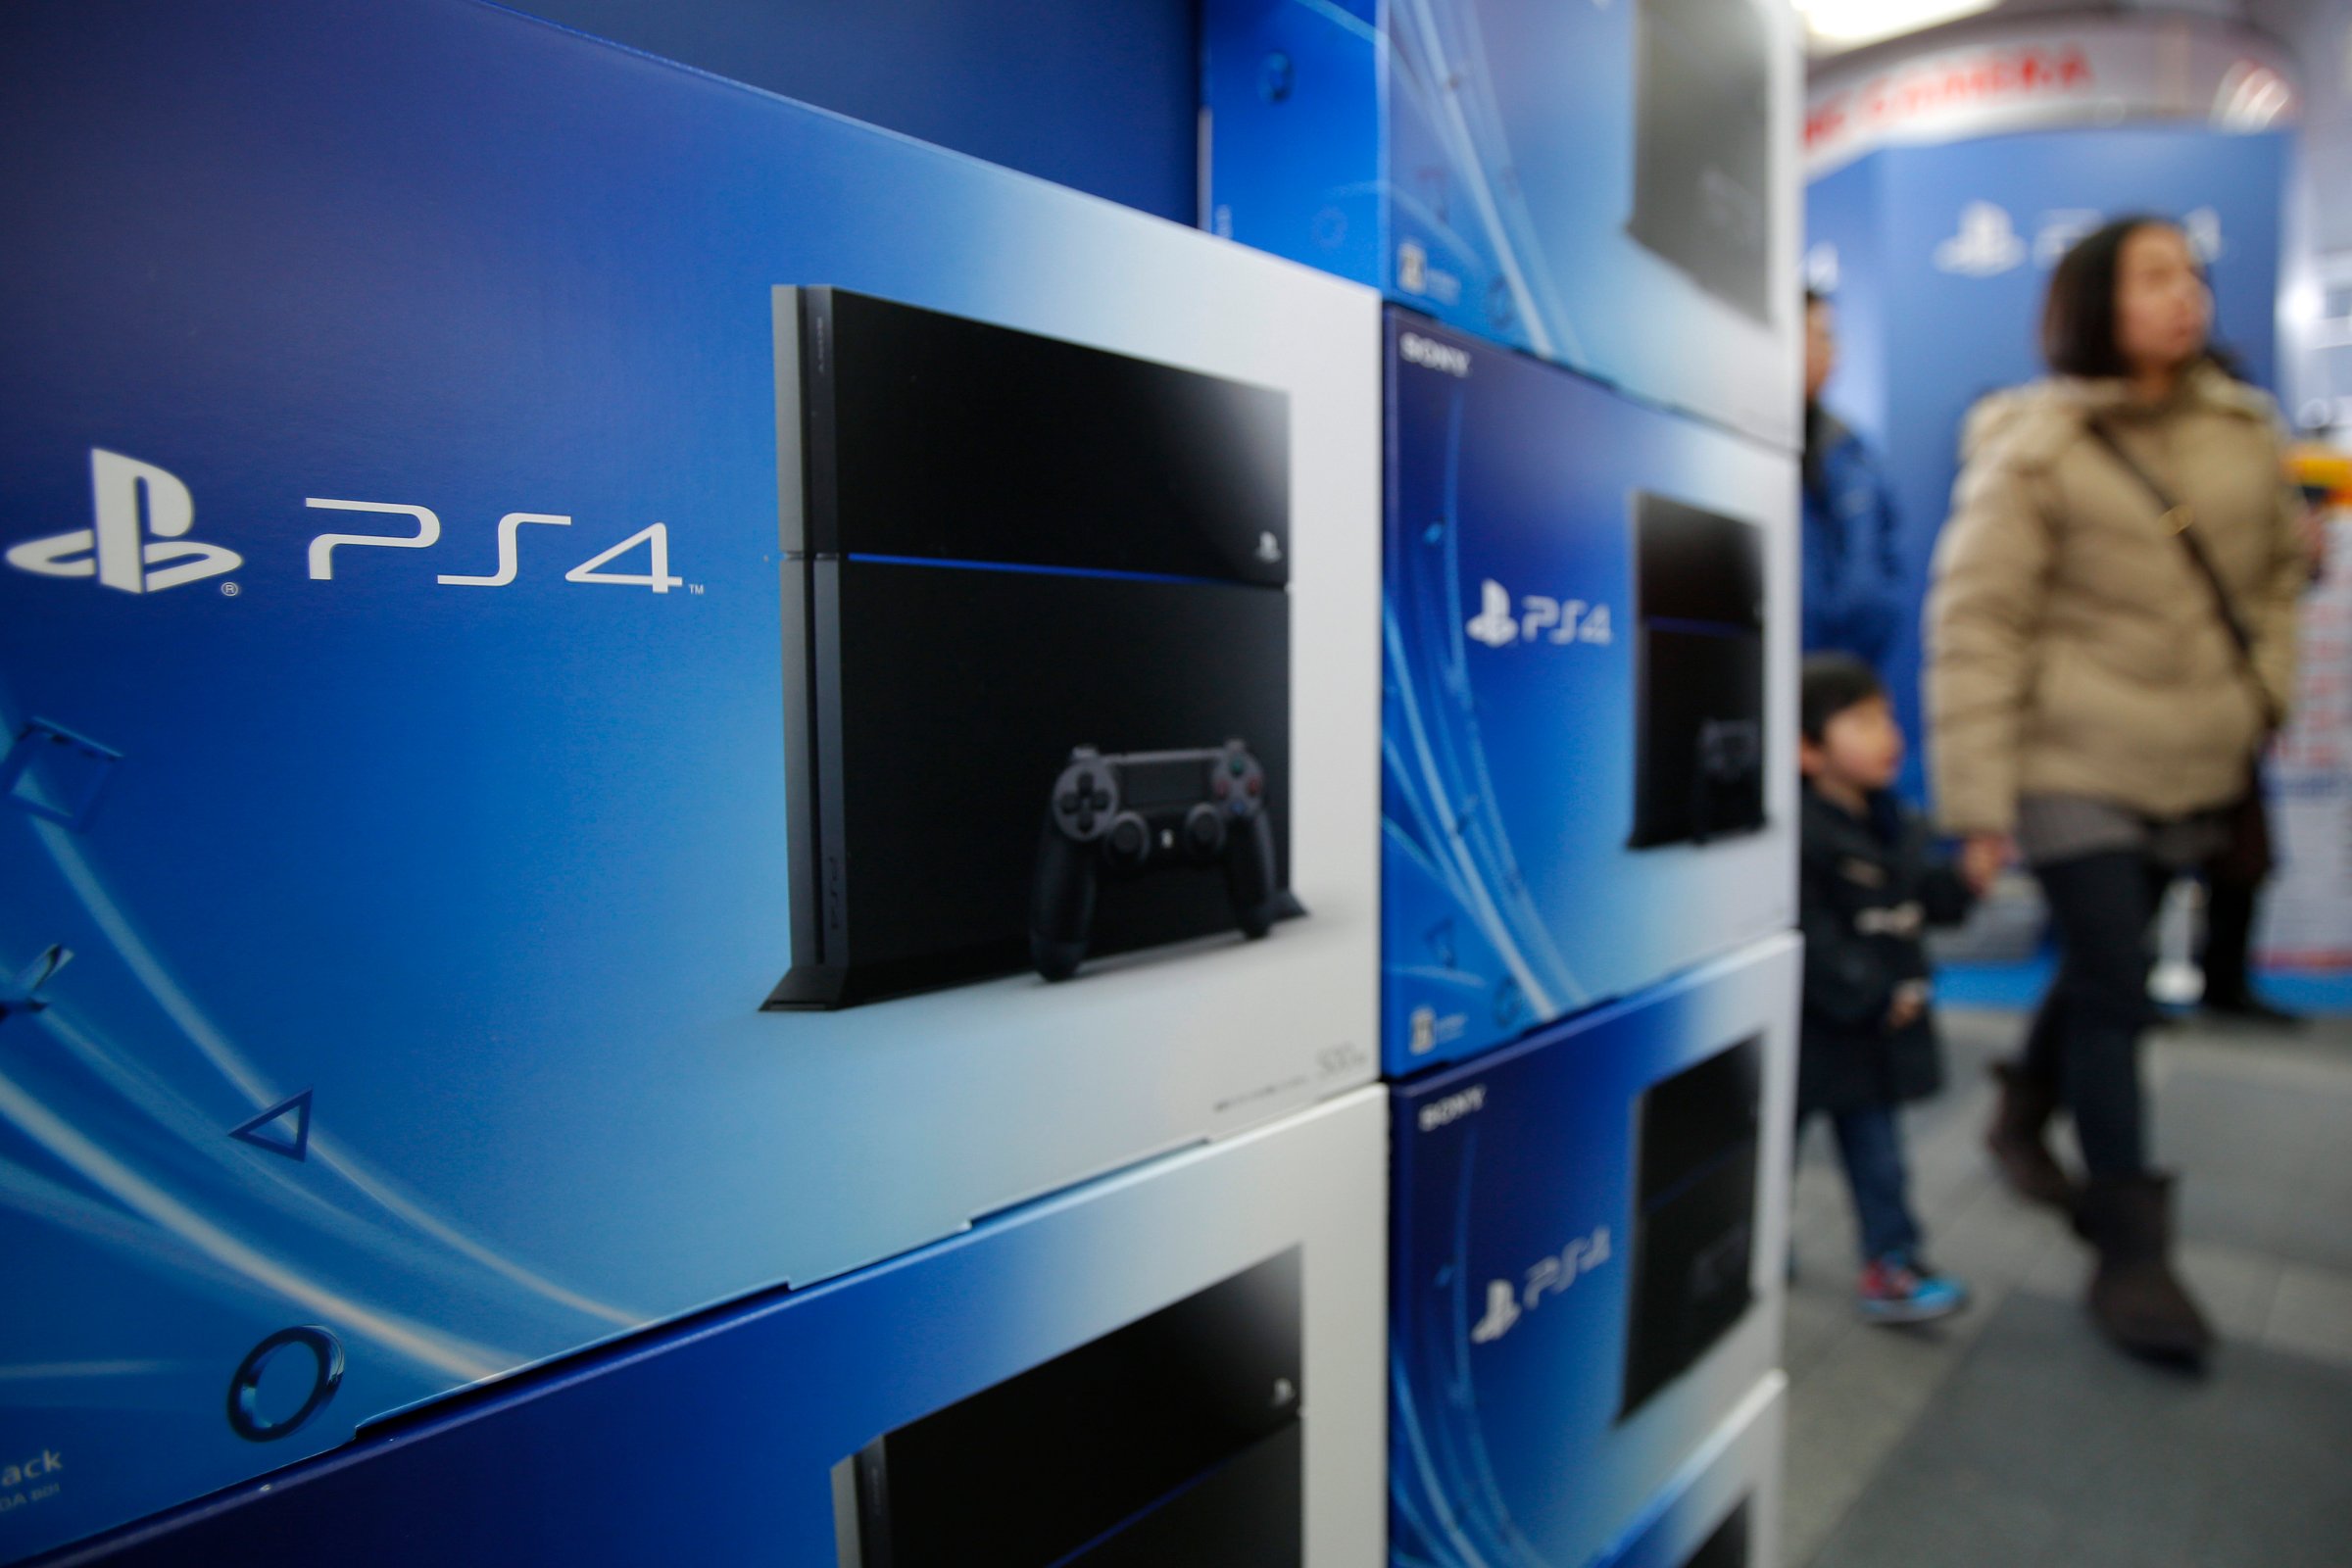 Sony Launches PlayStation 4 In Japan As Console Retakes U.S. Retail Lead Over Microsoft's Xbox One